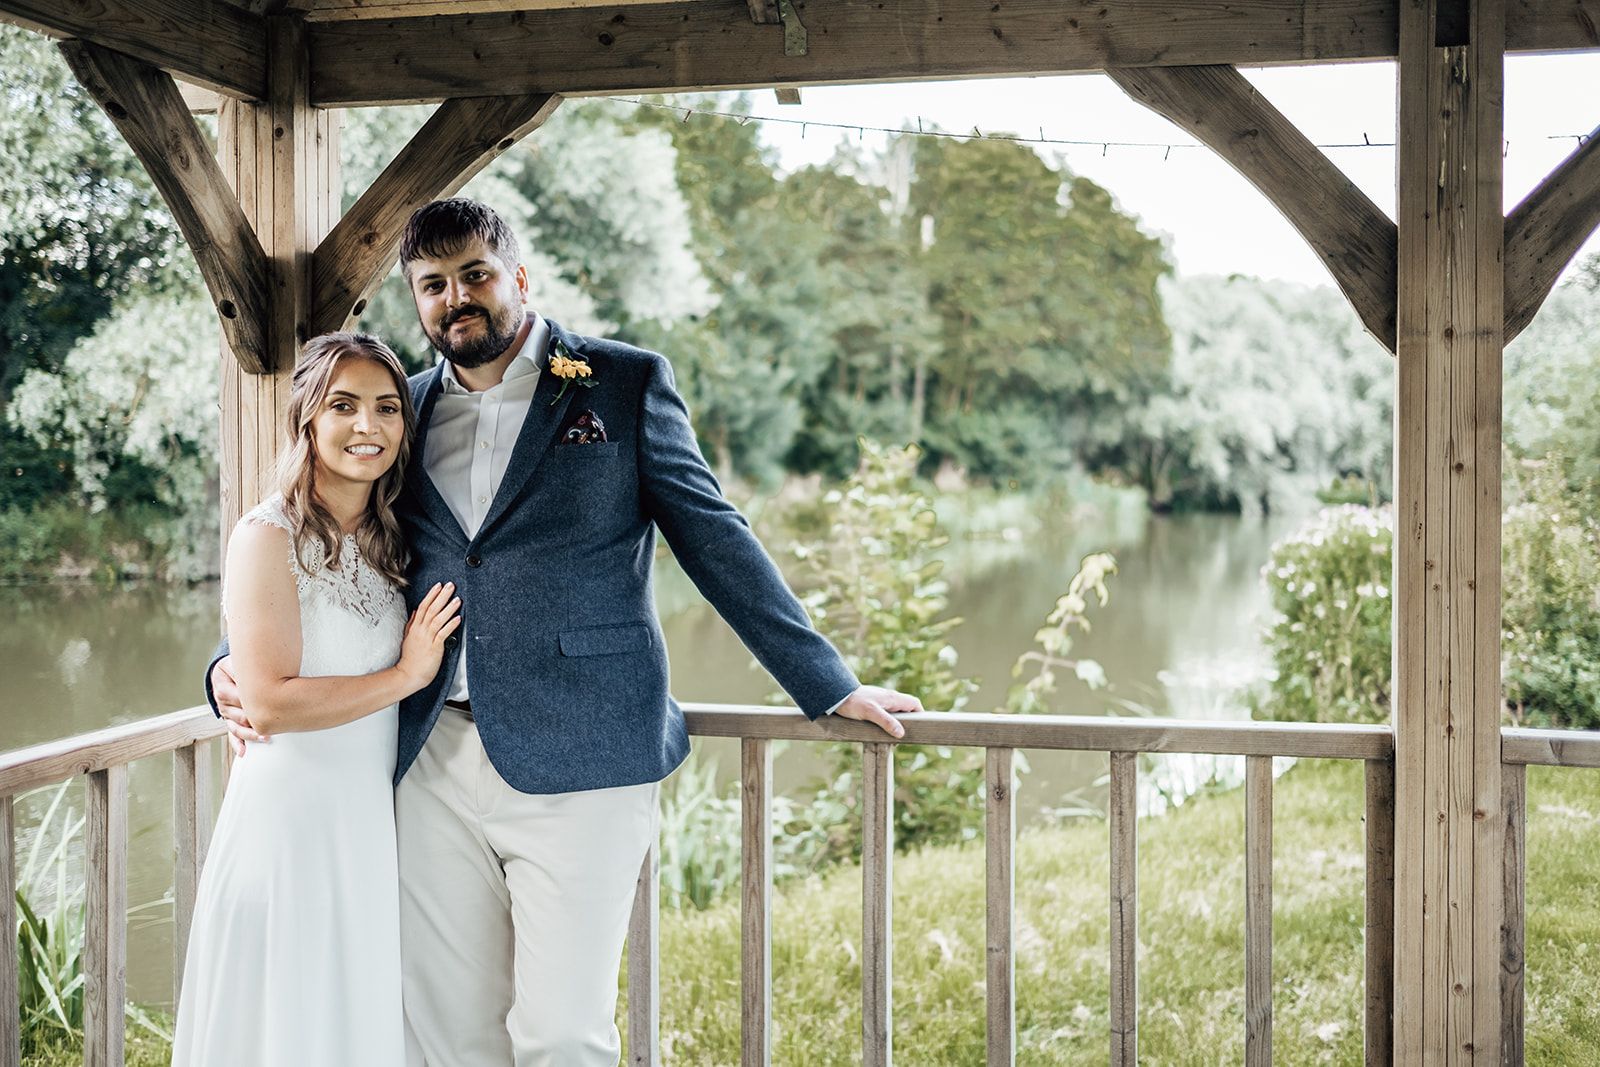 Newly weds stand in front of the lake under the gazebo smiling at the camera. Photo thanks to Francesca Checkley Photography.